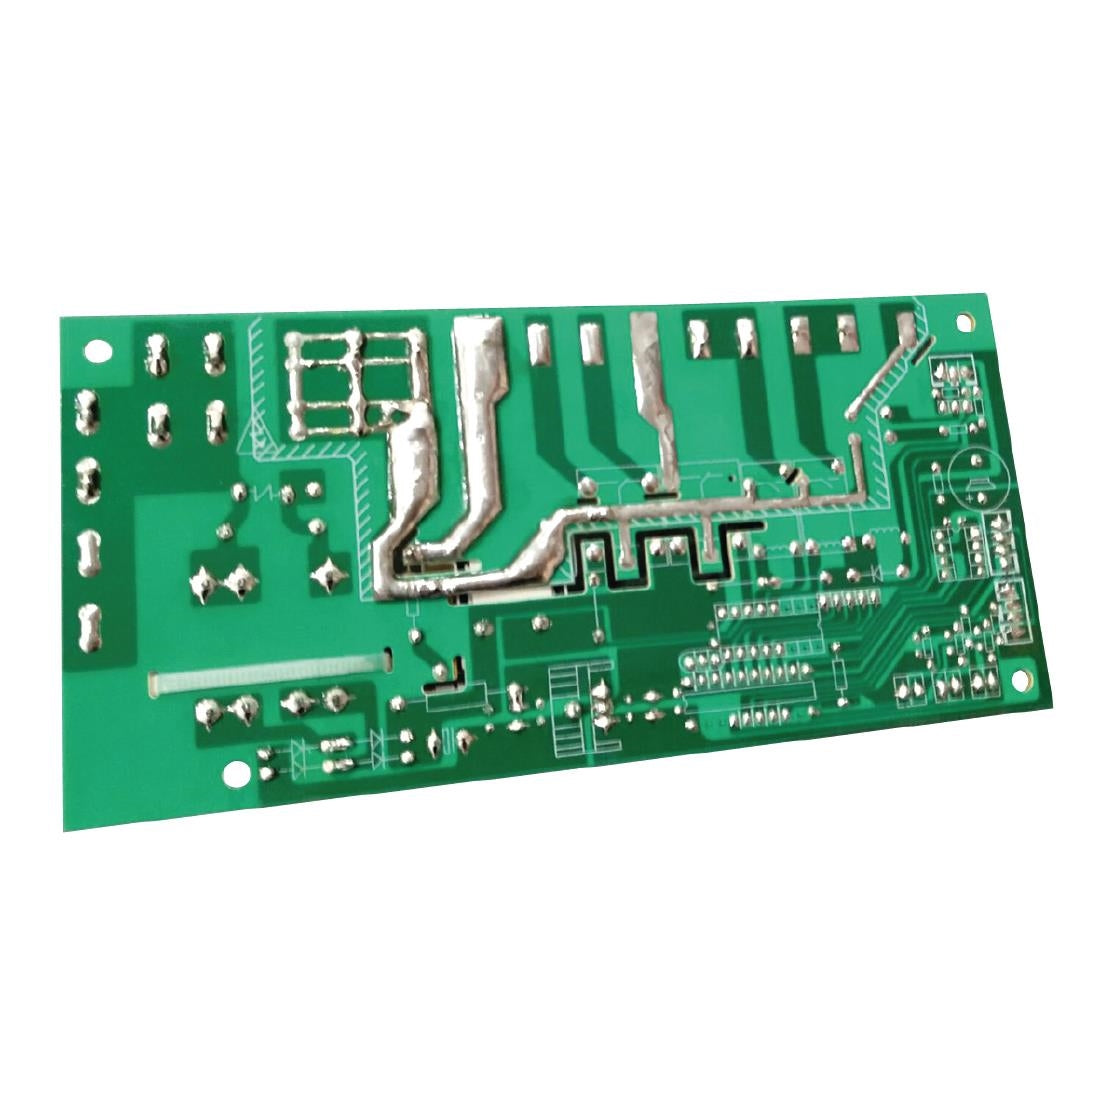 AG066 Replacement PCB for CG841